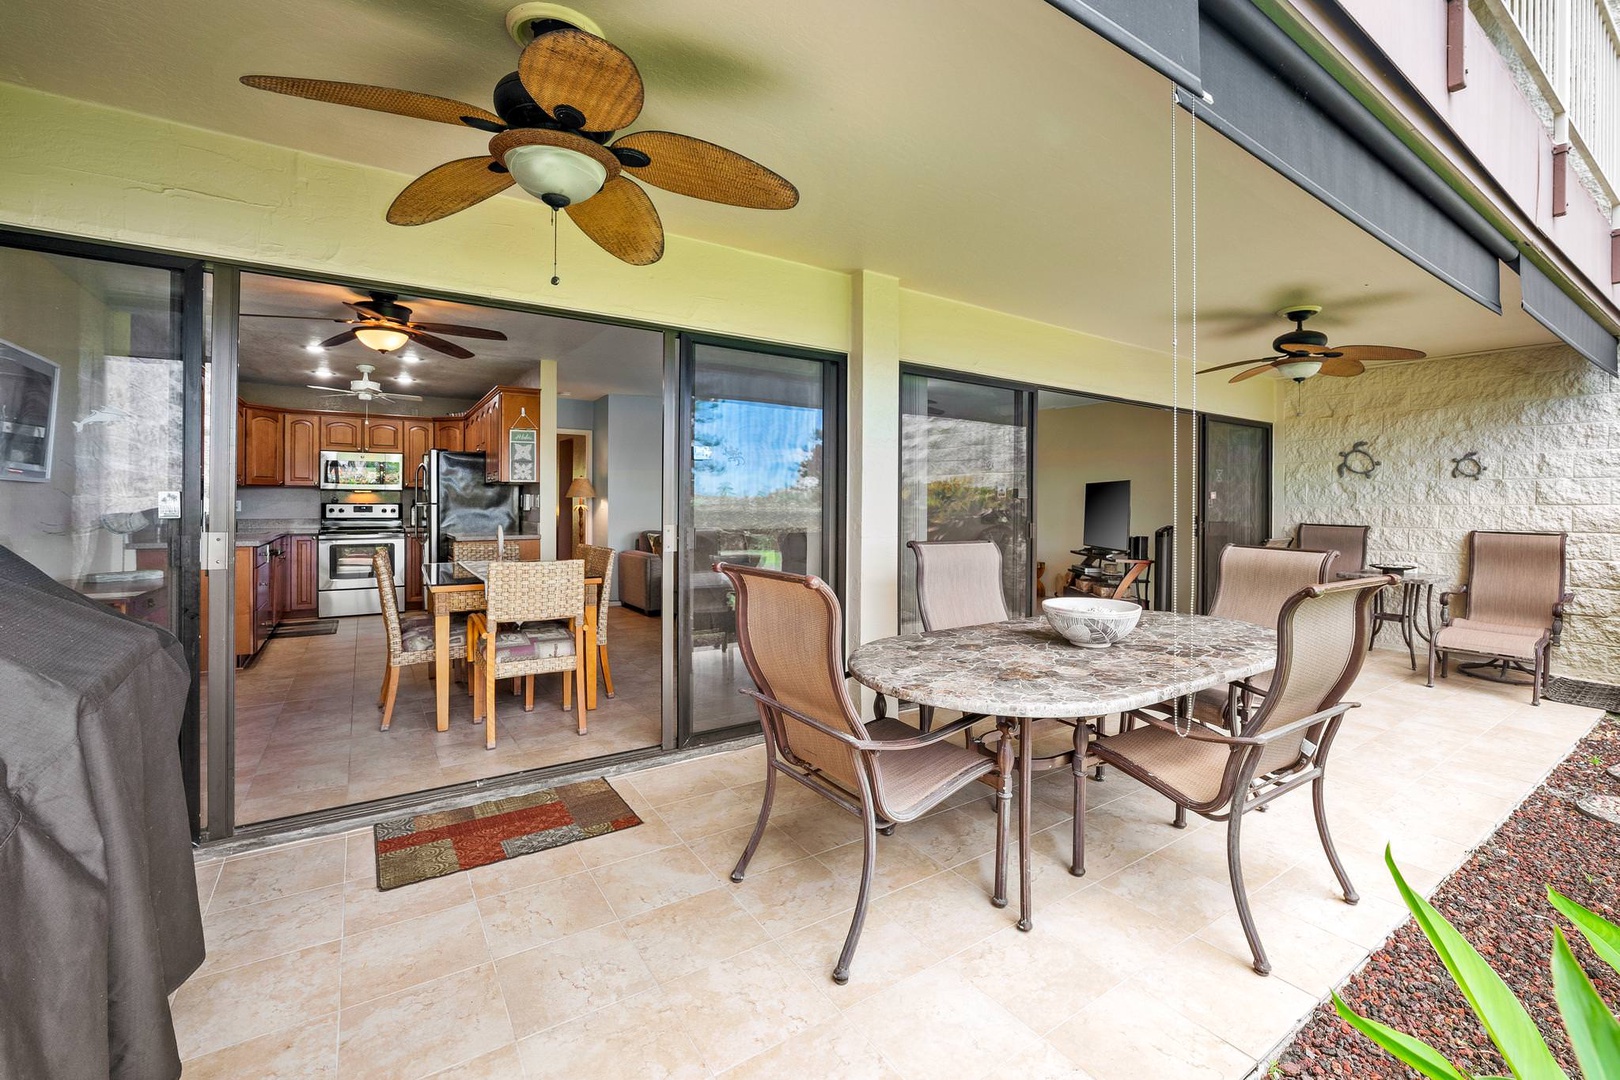 Private lanai with garden view, BBQ, and patio seating